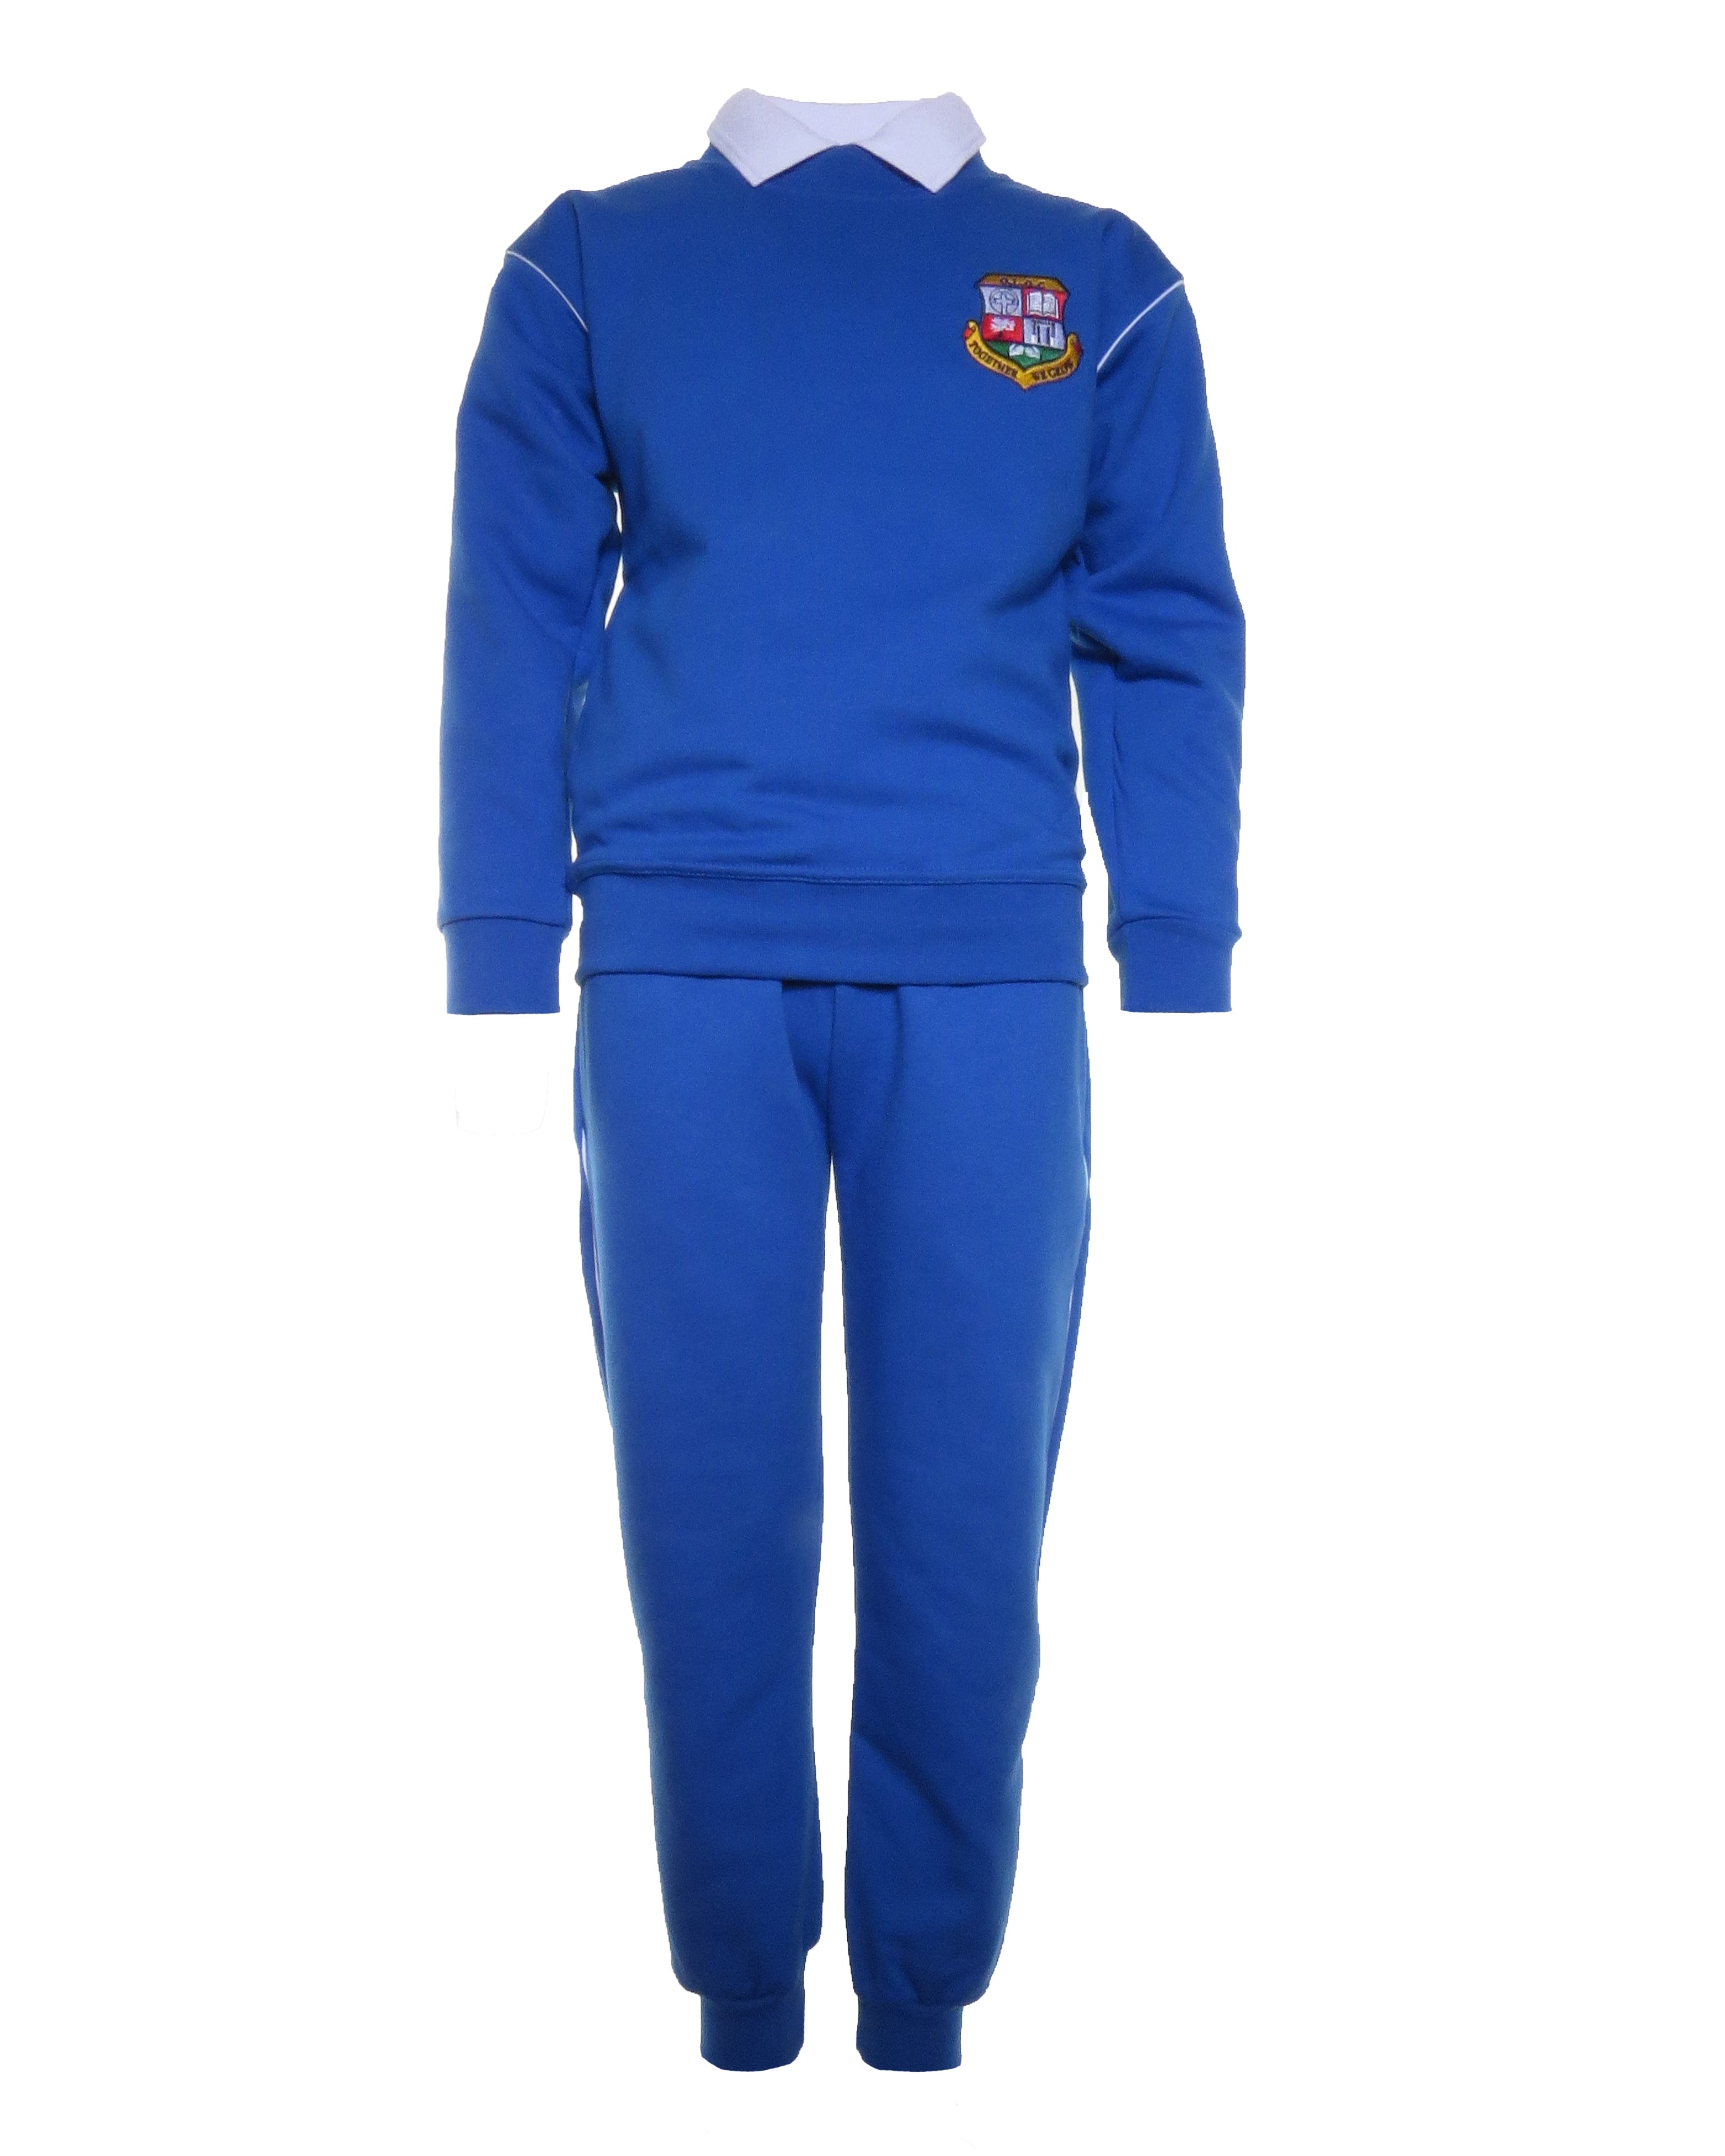 Our Lady Of Consolation Tracksuit